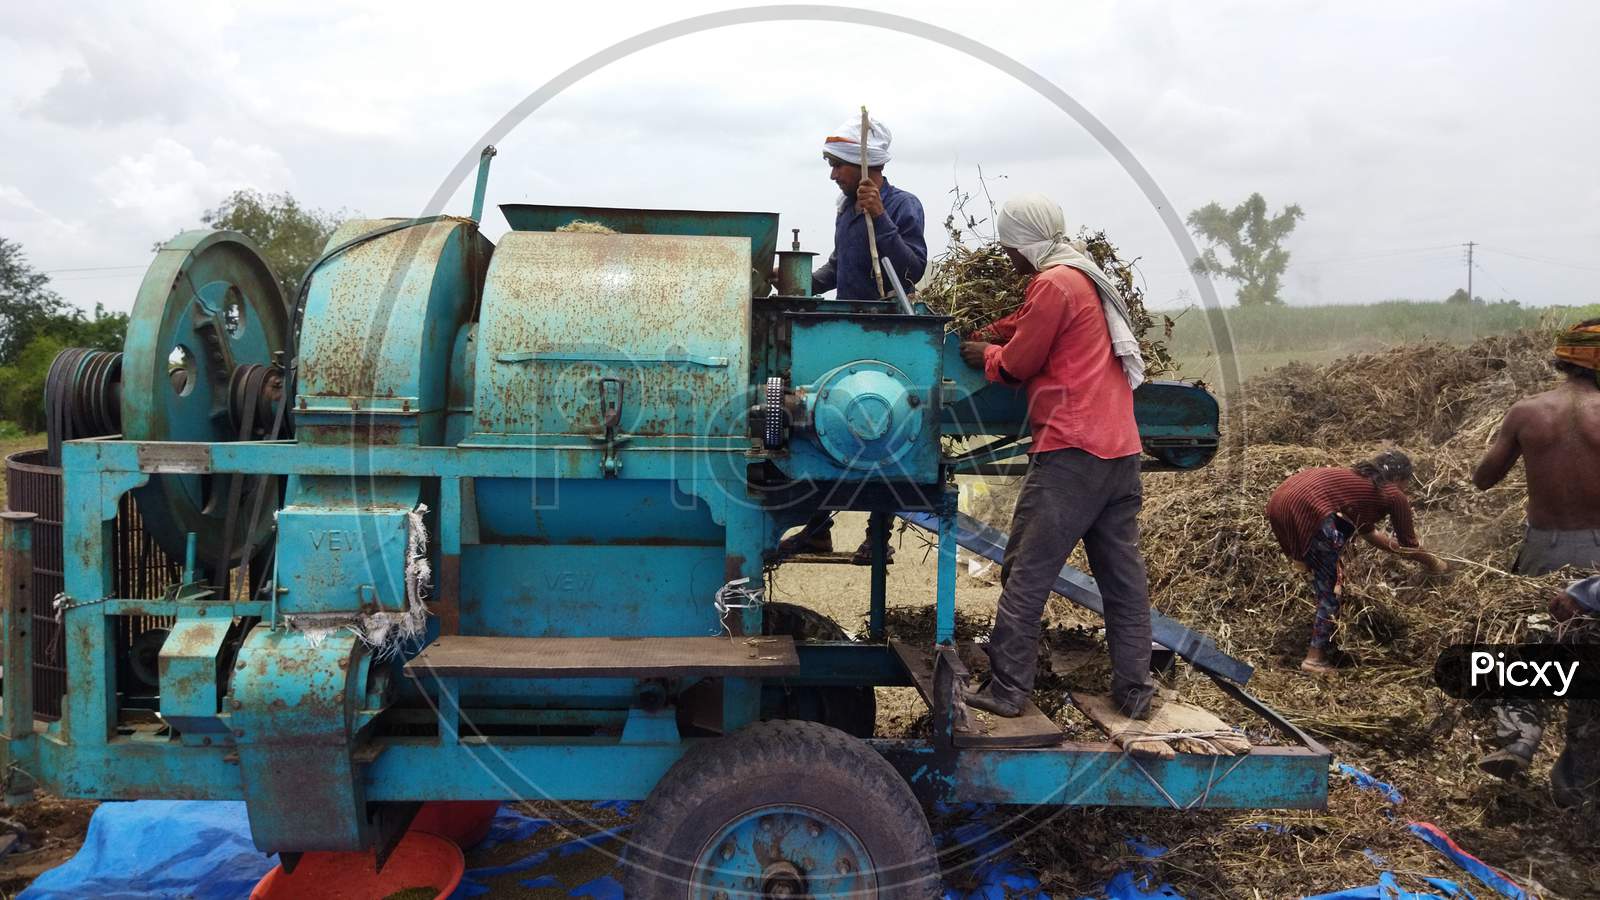 Workers separating moong grains by thresher machine. Pile of moong, workers and thresher machine in the picture